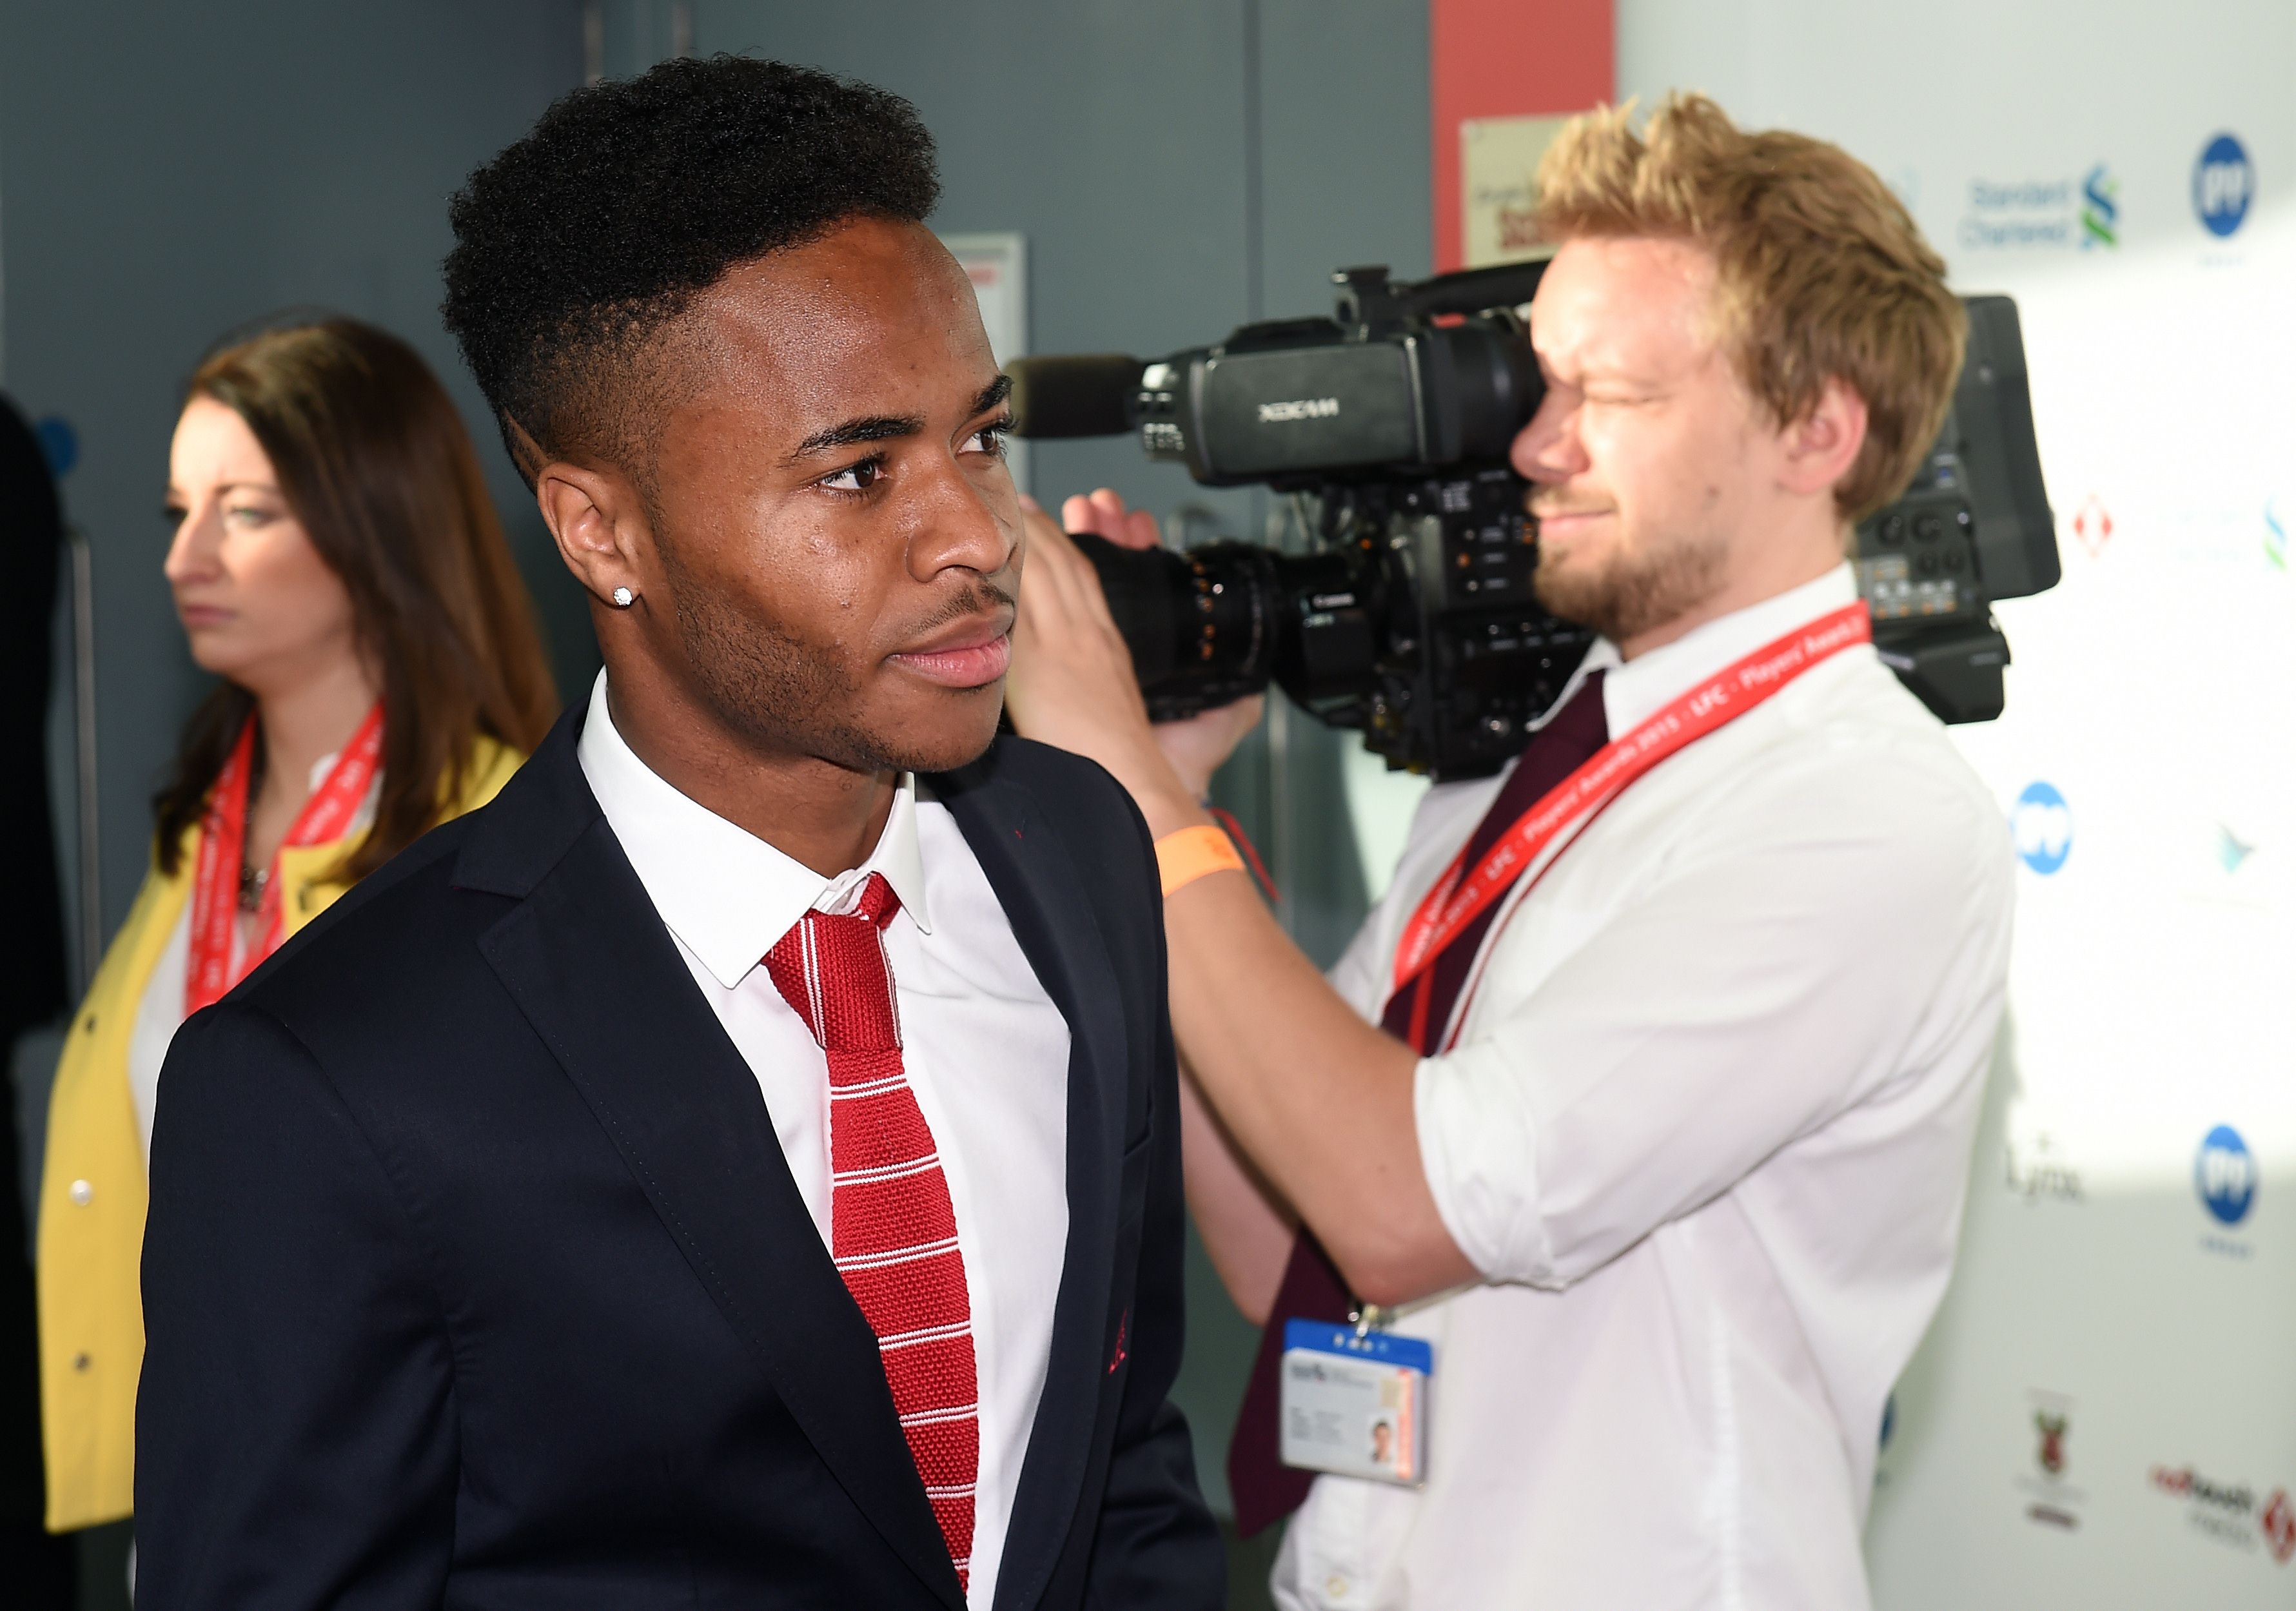 Raheem Sterling was greeted with a mixture of boos and calls to stay when he picked up his award. Photo: AFP